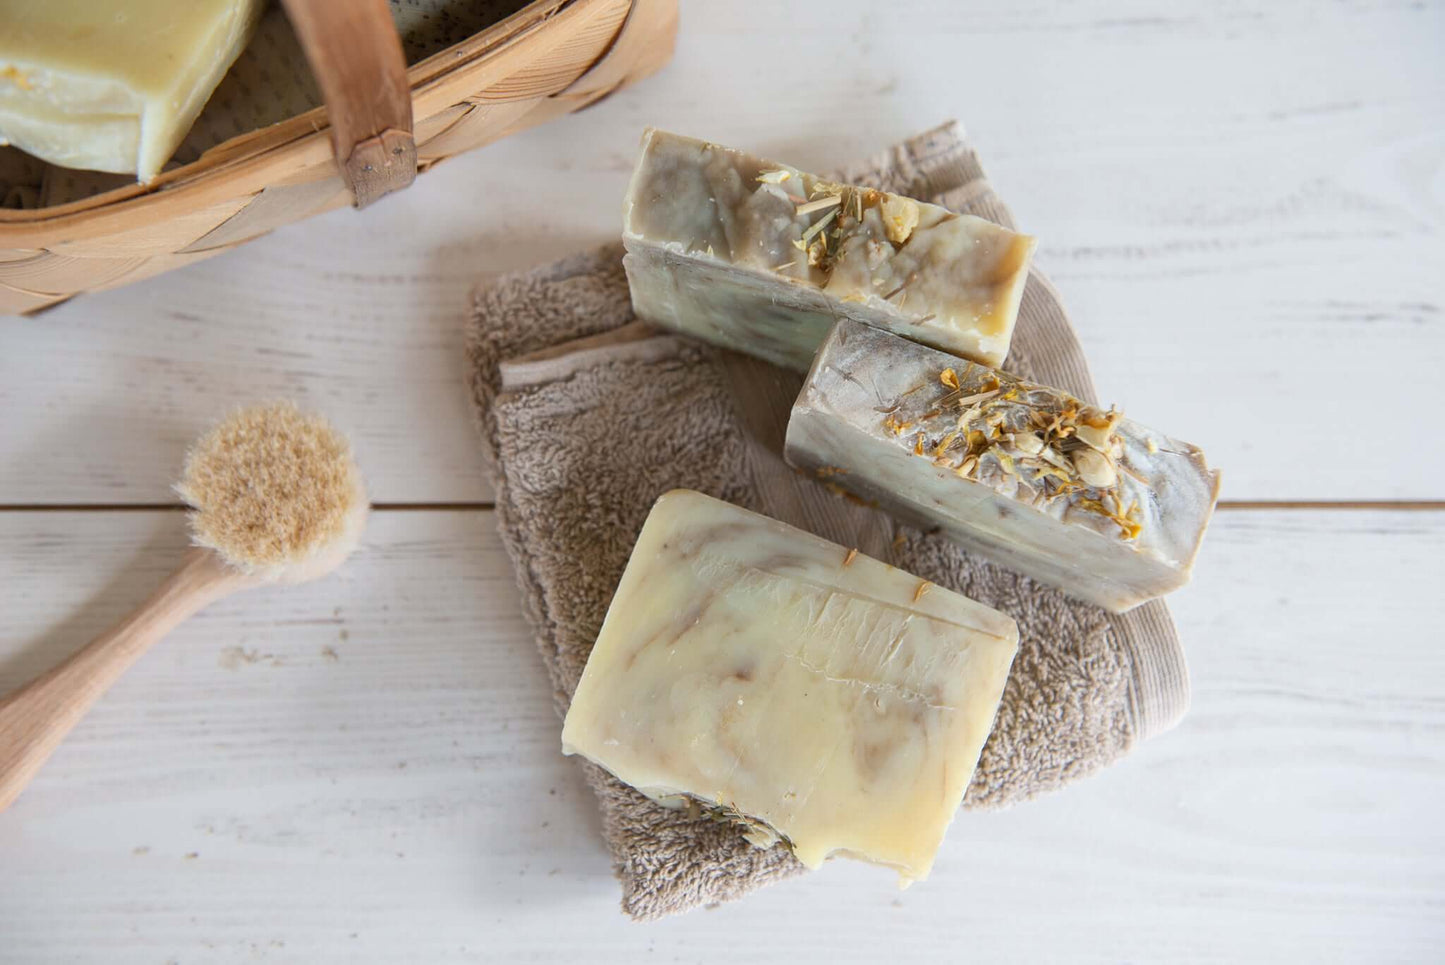 This handmade natural soap with Lemongrass, Ginger & Yellow Clay deeply nourishes your skin